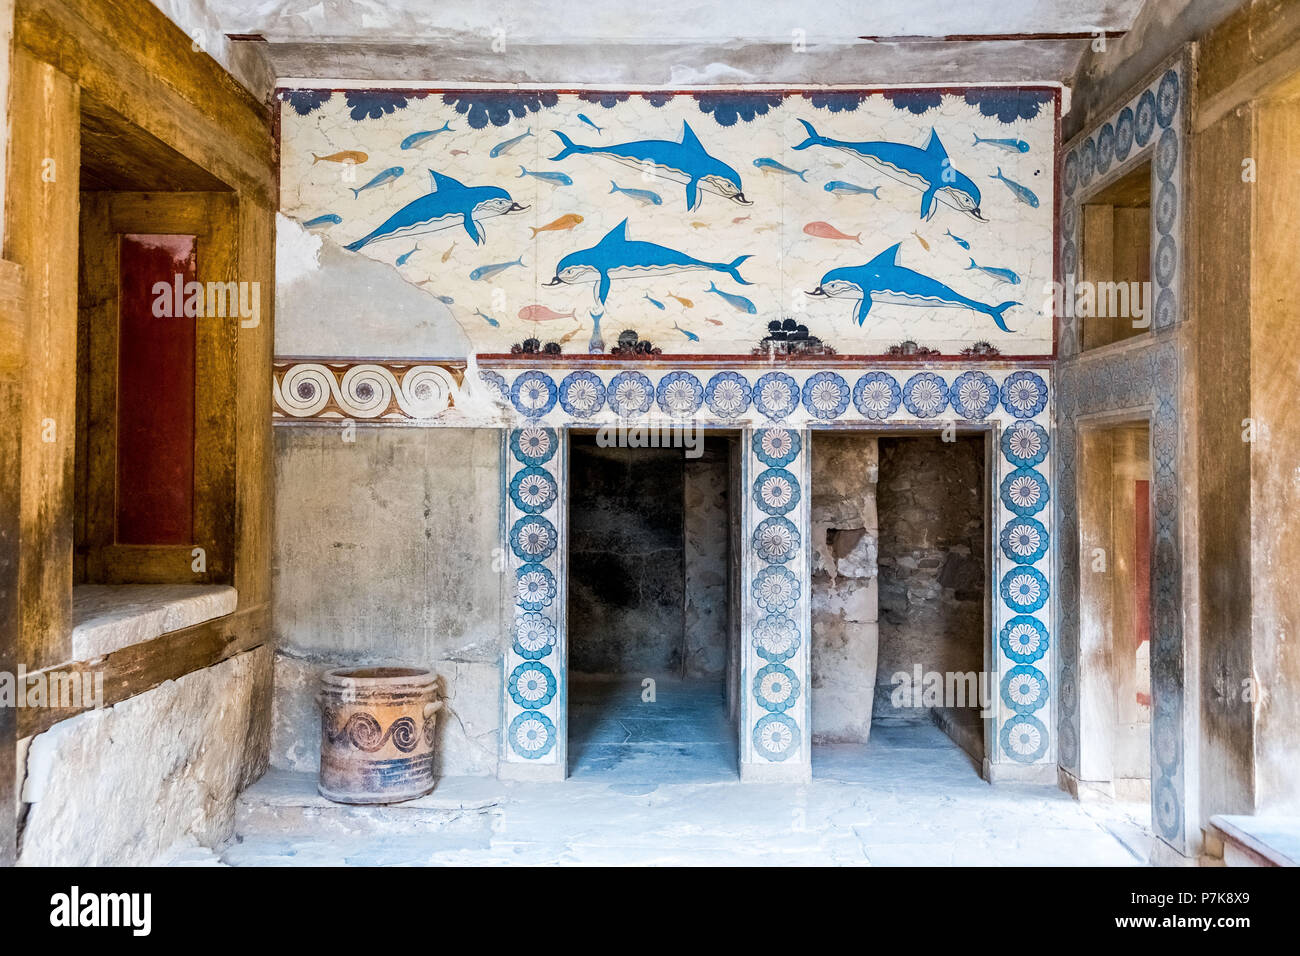 Reconstruction of the dolphin frescoes by Arthur Evans, Megaron of the king and pillared vestibule in the palace of Knossos, Knossos, Minoan archaeological site, Crete, Greece, Europe Stock Photo